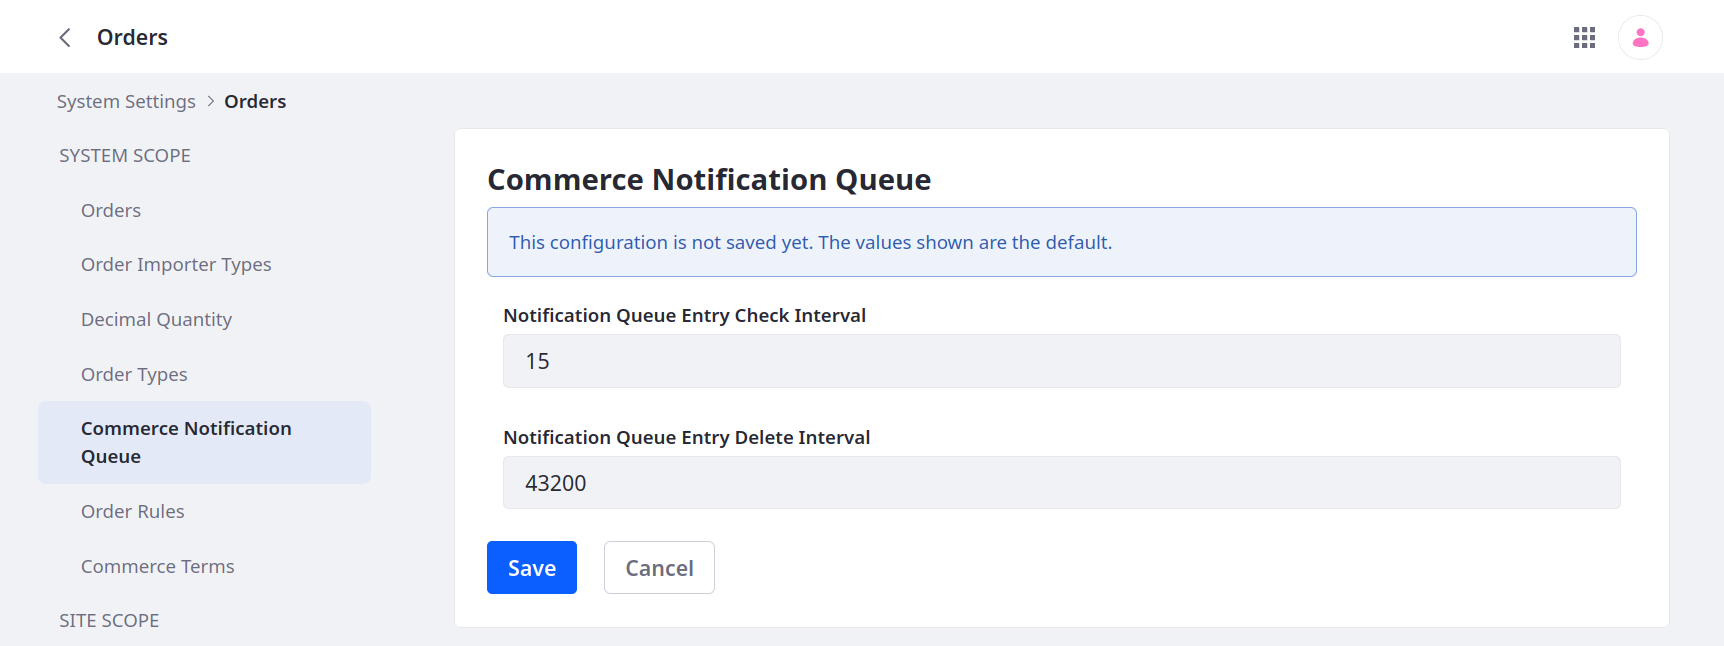 Change the default values for the Notification Queue Entry Check and Delete Intervals